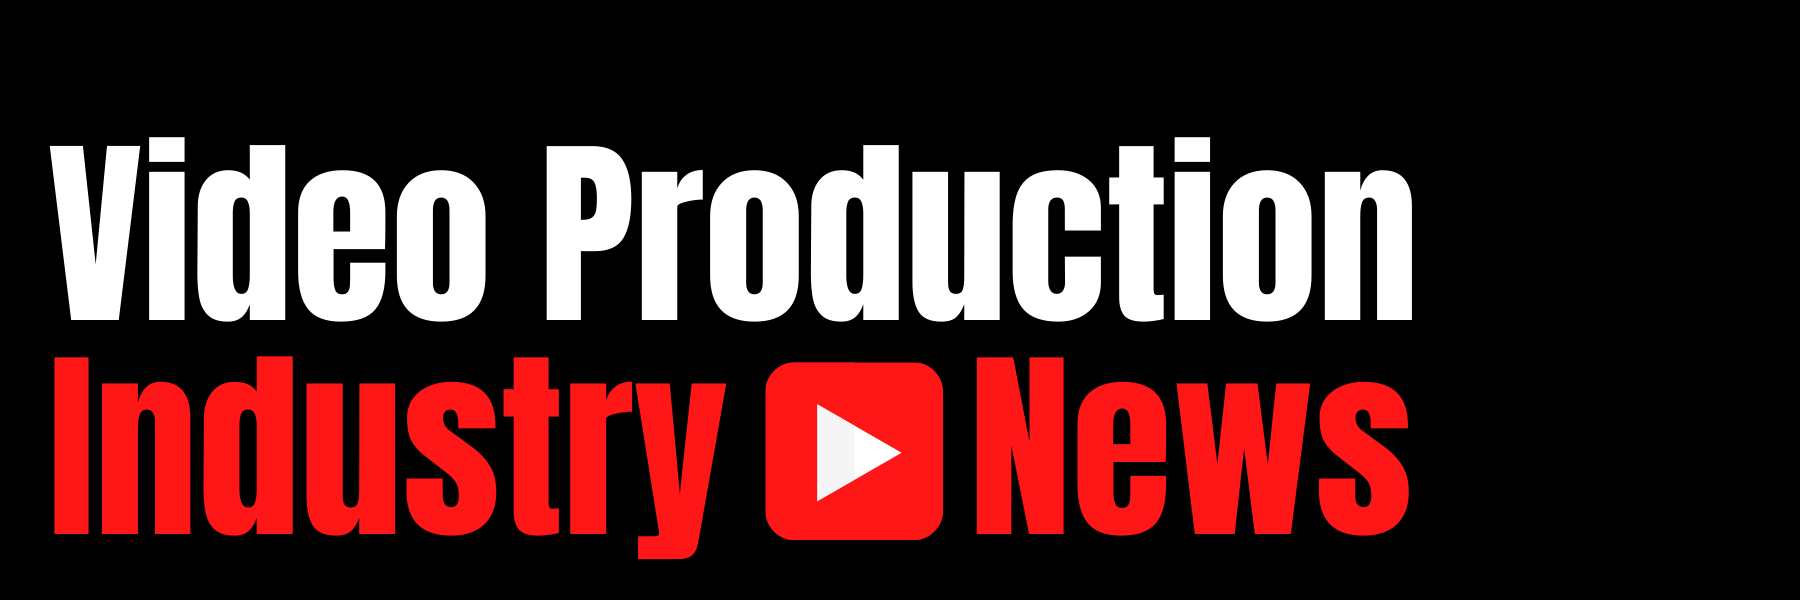 Video Production News